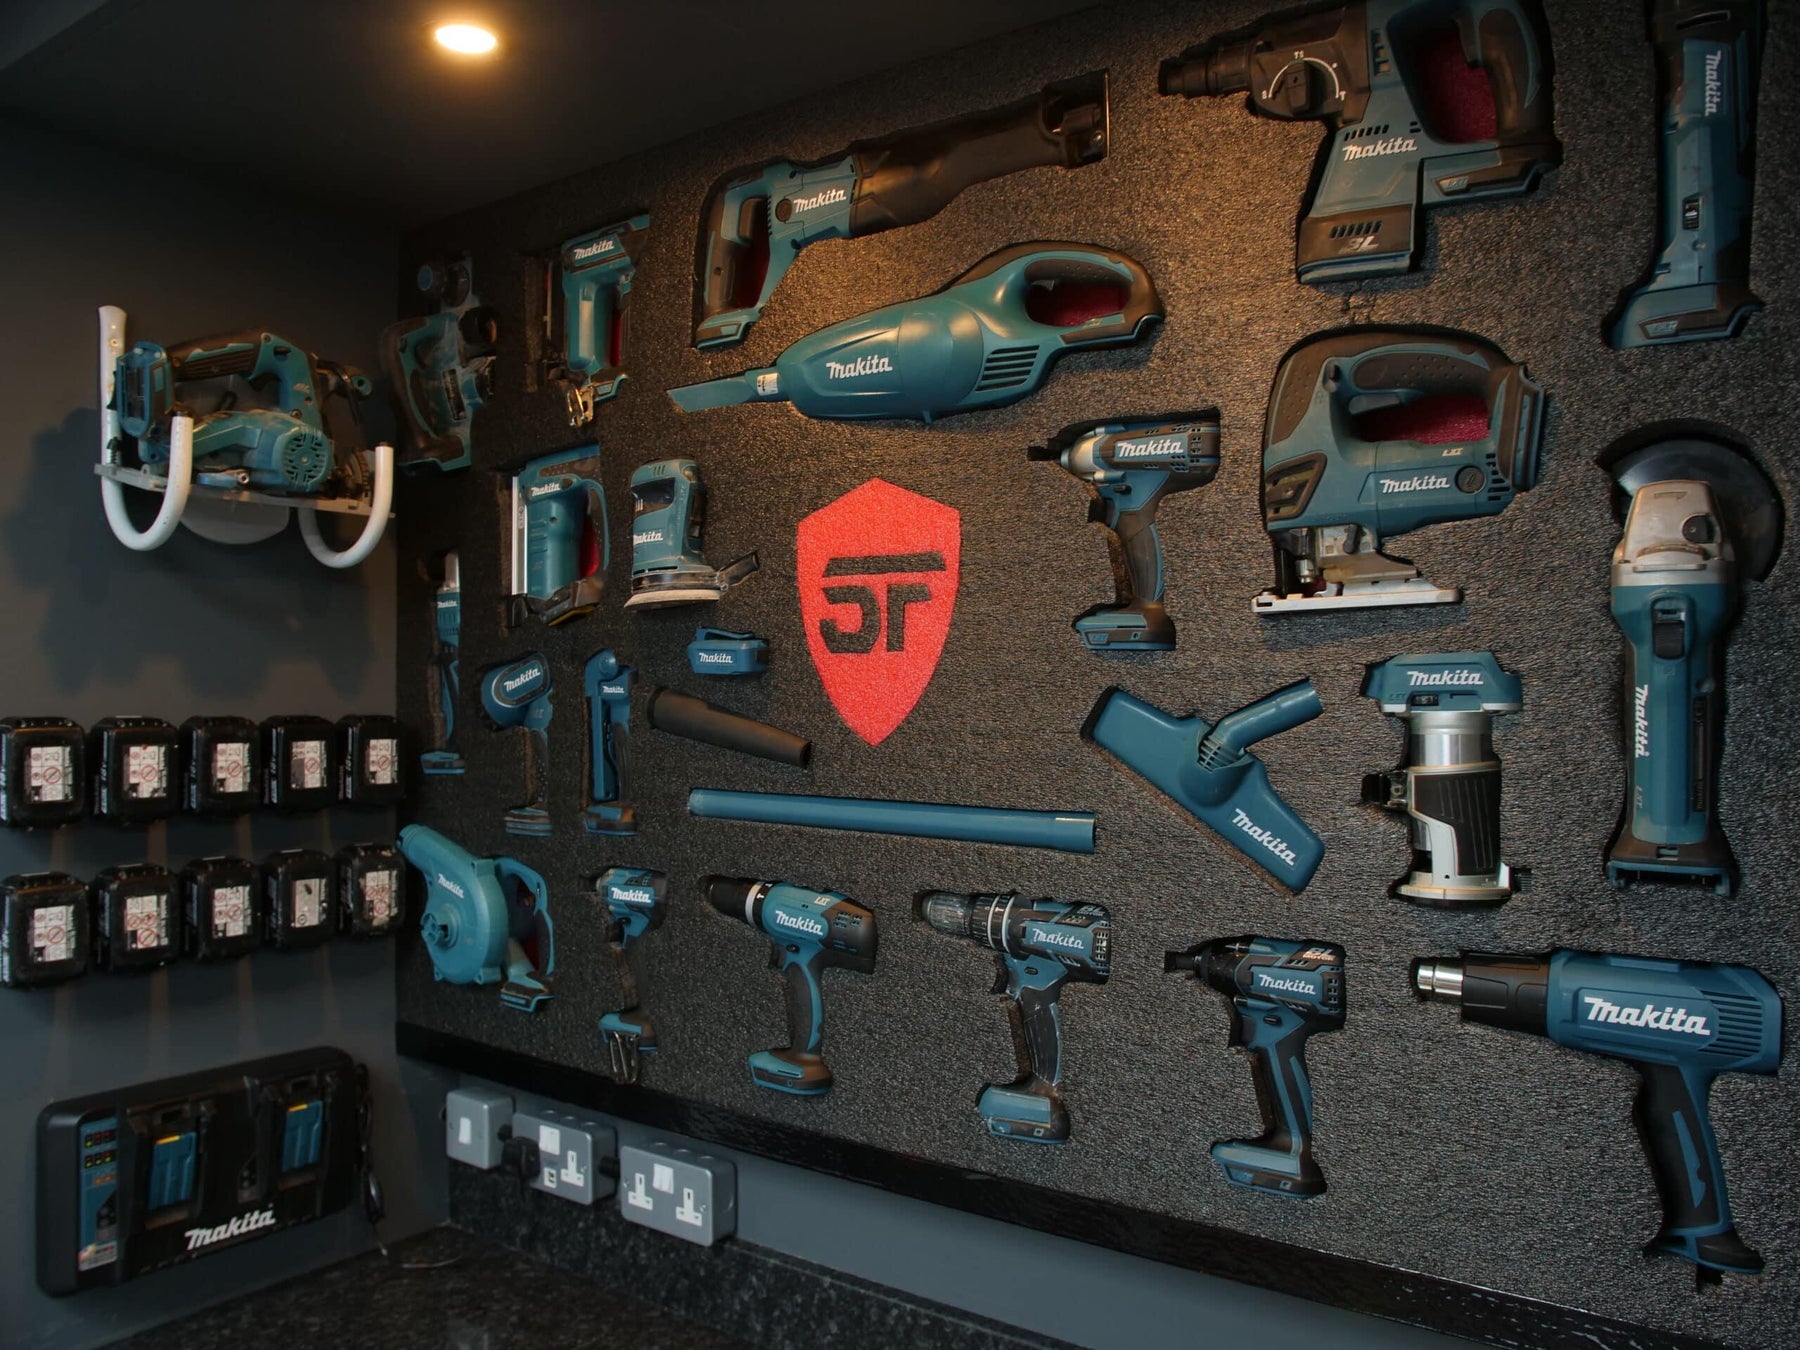 The return of THE best solution for Makita tool storage... the Power Tool Wall! - Shadow Foam